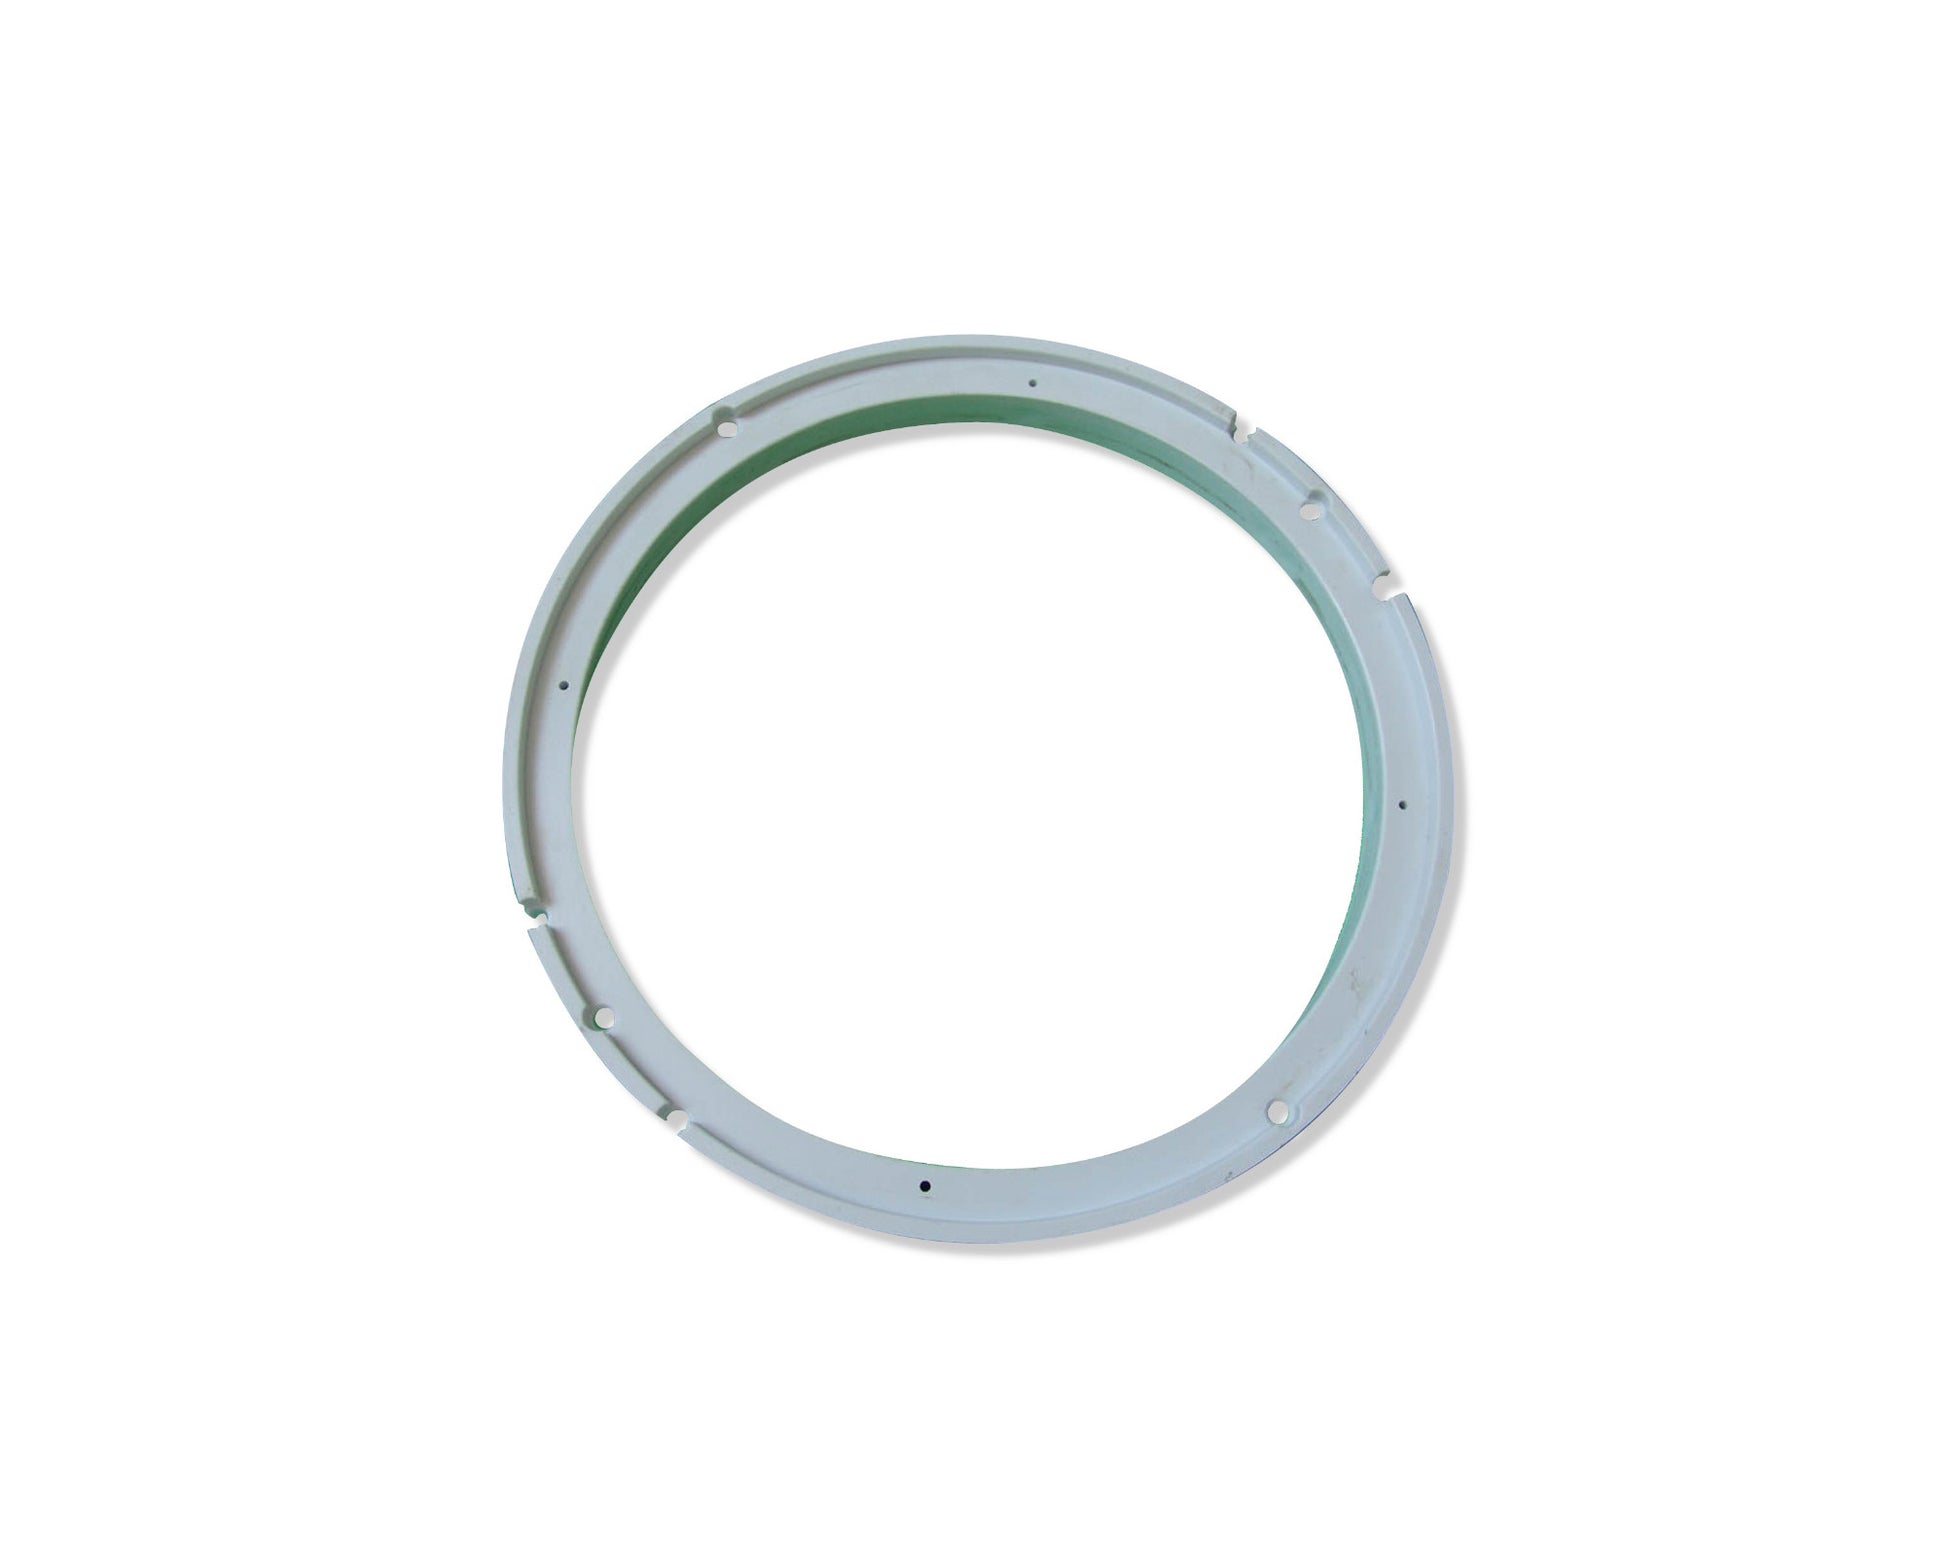 Mounting Ring for Afras Anti-Vortex ABS Drain Cover 11 inches White ABS for Pools